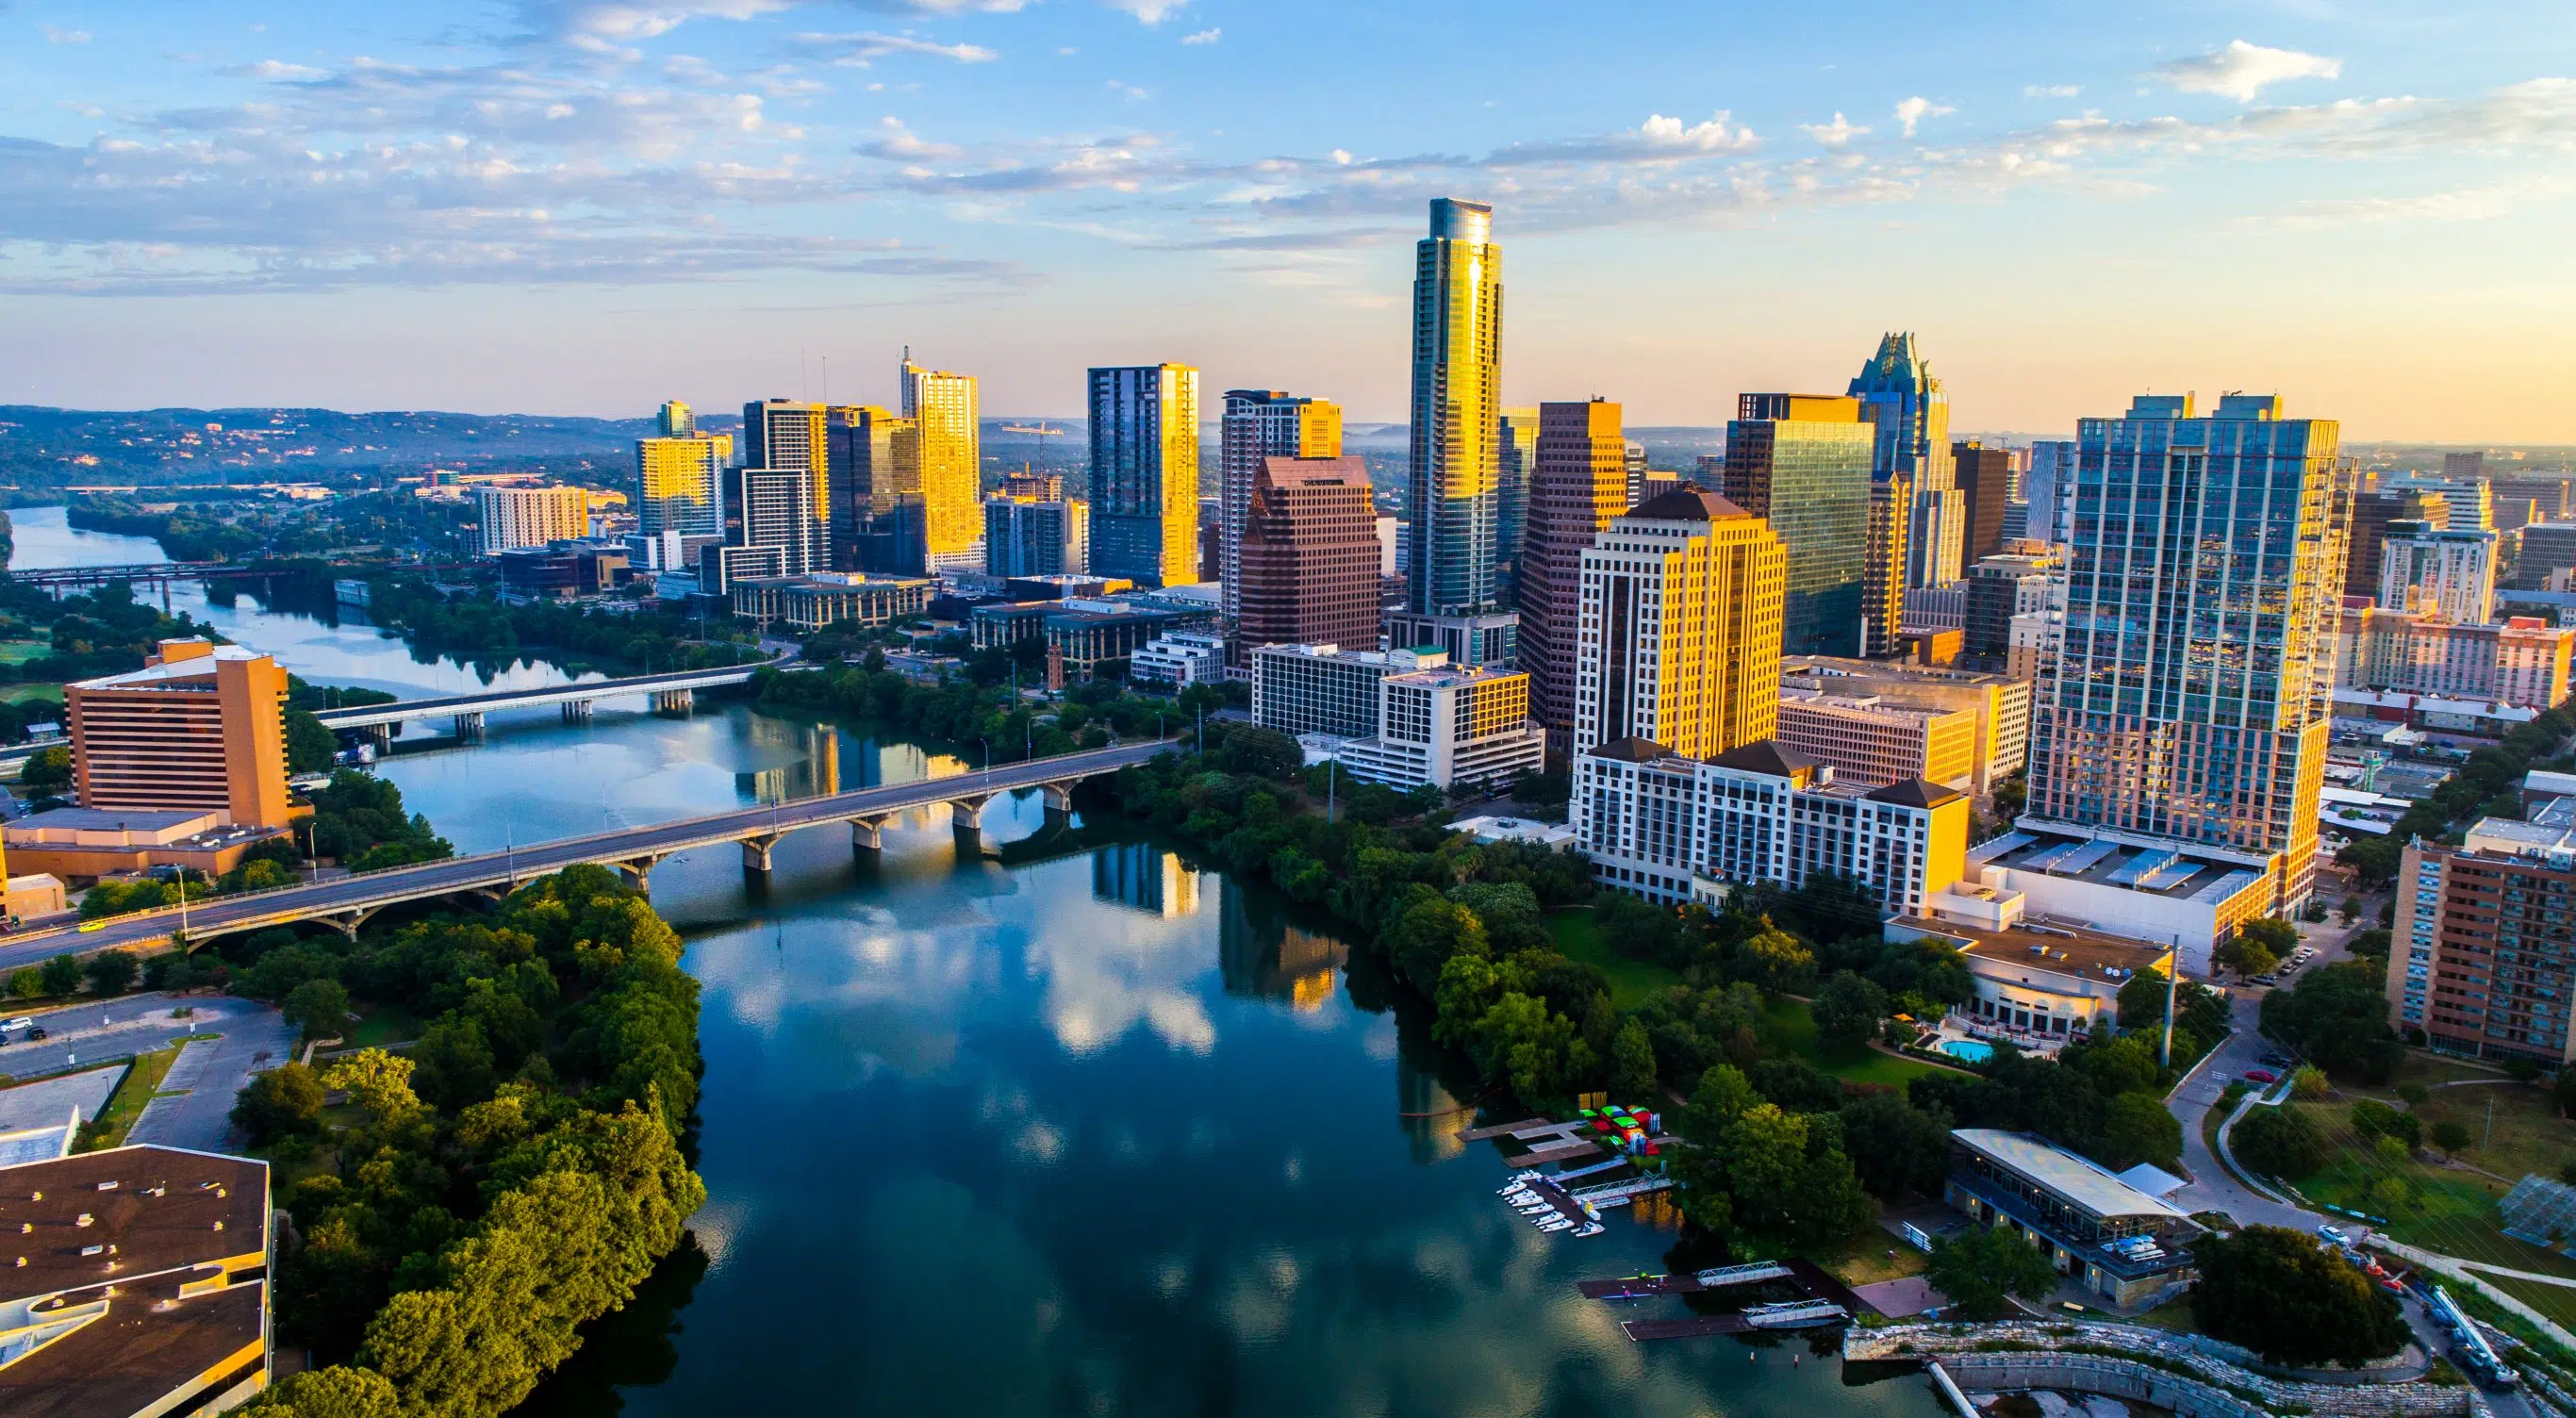 Austin Ranks in Top 3 Most Overworked US Cities